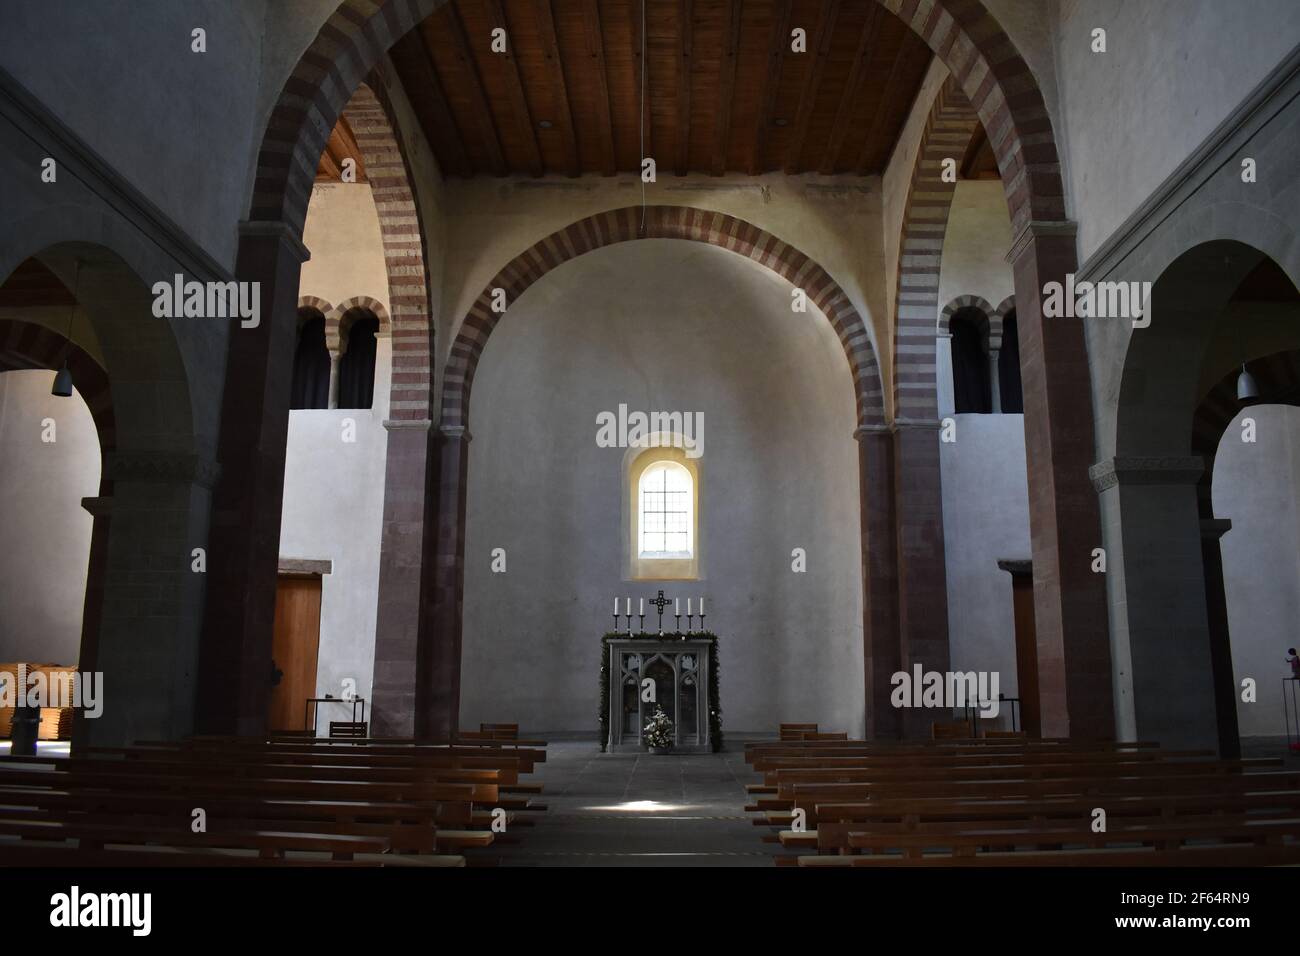 The Abbey Church of St Mary and Mark in Reichenau Mittelzel. View from the nave of the west transept and the altar of St Mark in front of the apse. Stock Photo